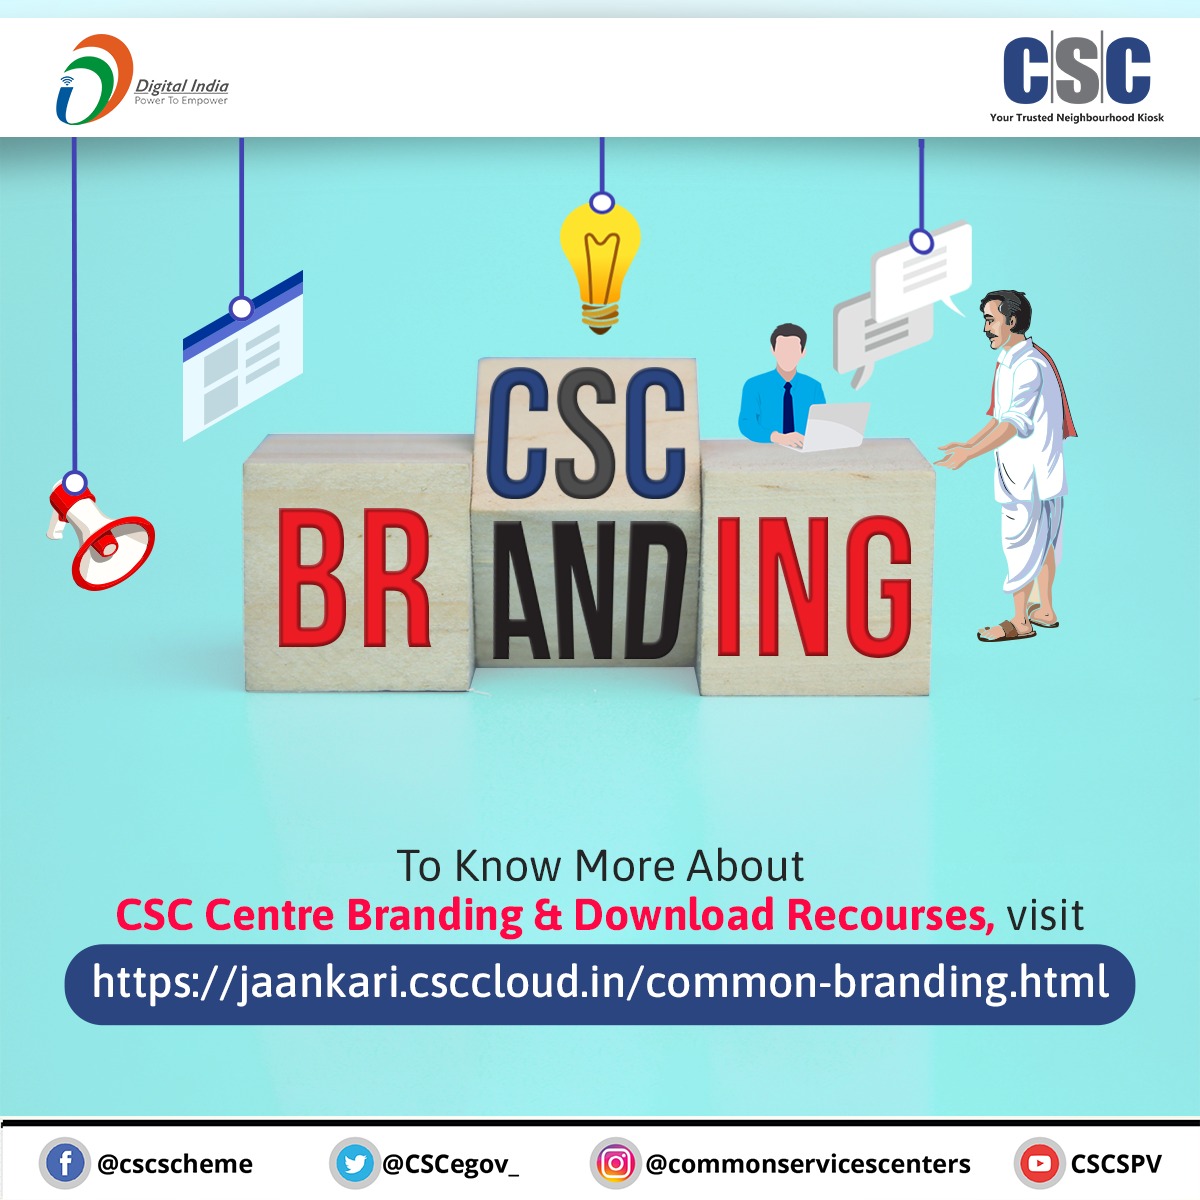 Dear VLEs, how about changing your CSC centre Branding this festive season? To Know More About #CSC Centre Branding and Download Recourses, visit jaankari.csccloud.in/common-brandin… #DigitalIndia #CSCBranding #CSCJaankariSuvidhaPostal #RuralEmpowerment #FestiveSeason #DigitalInclusion